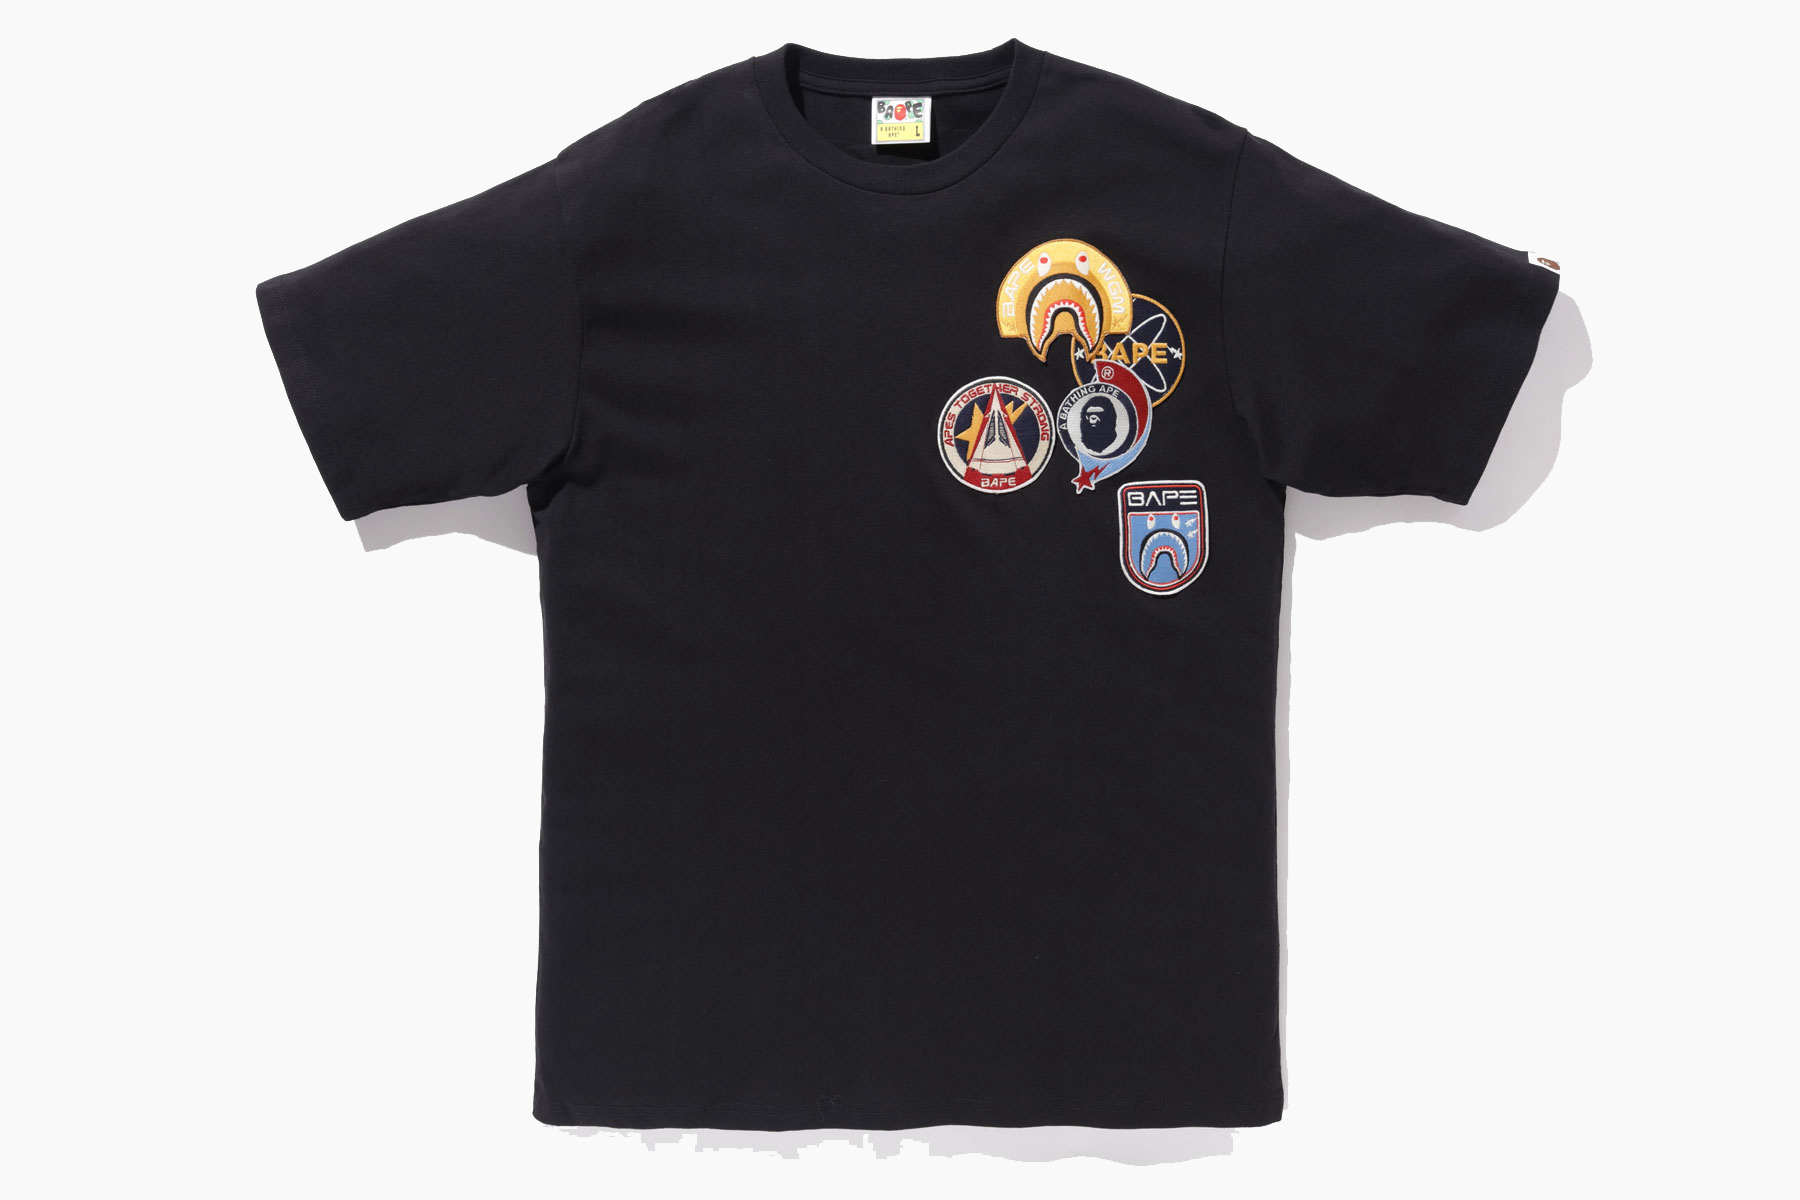 BAPE “The Return of Icarus” Collection